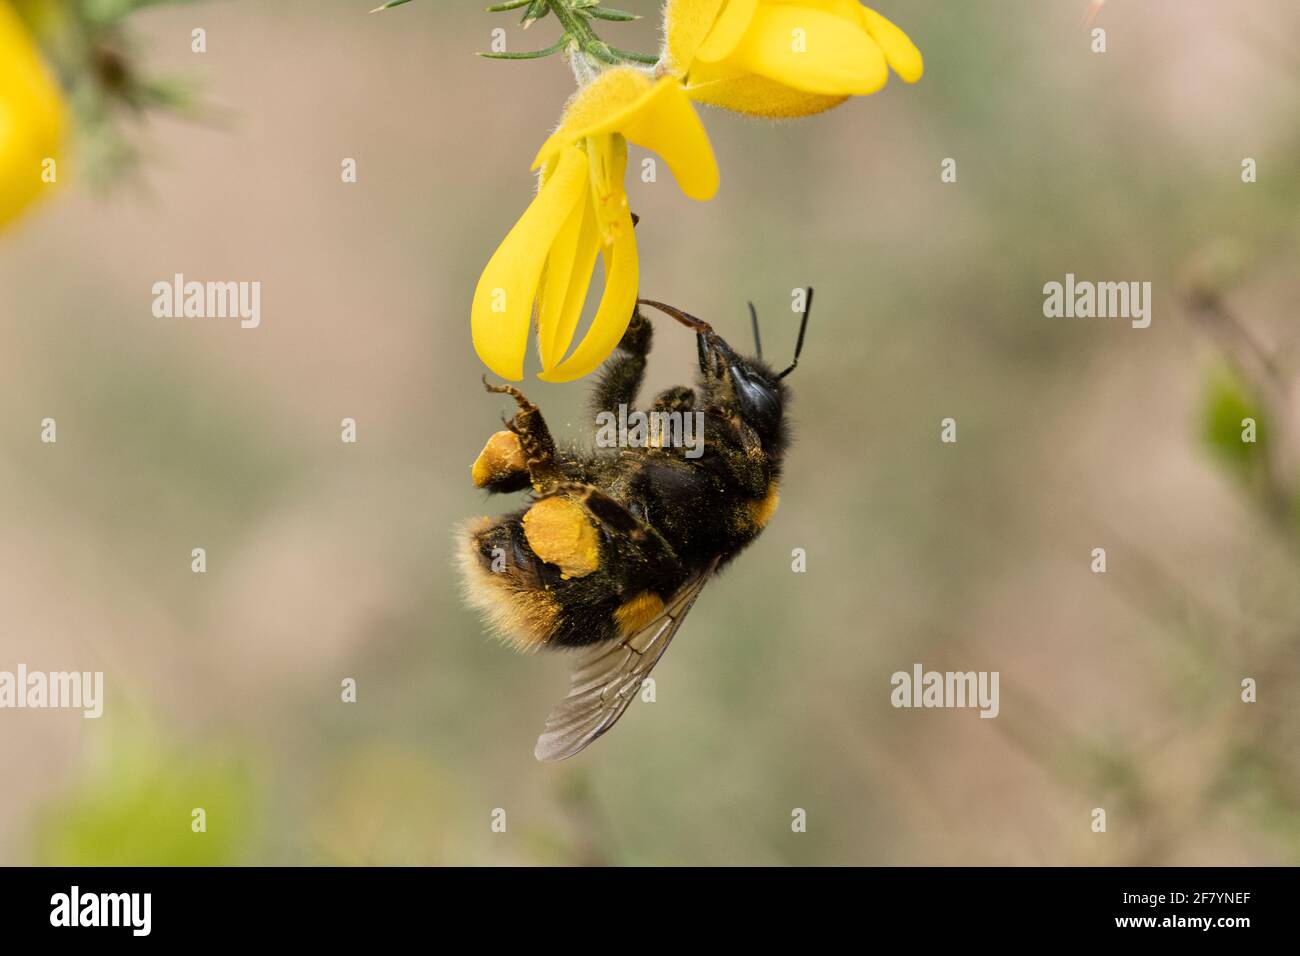 Buff-tailed bumblebee queen (Bombus terrestris) on yellow gorse flowers showing full pollen baskets, UK, April Stock Photo